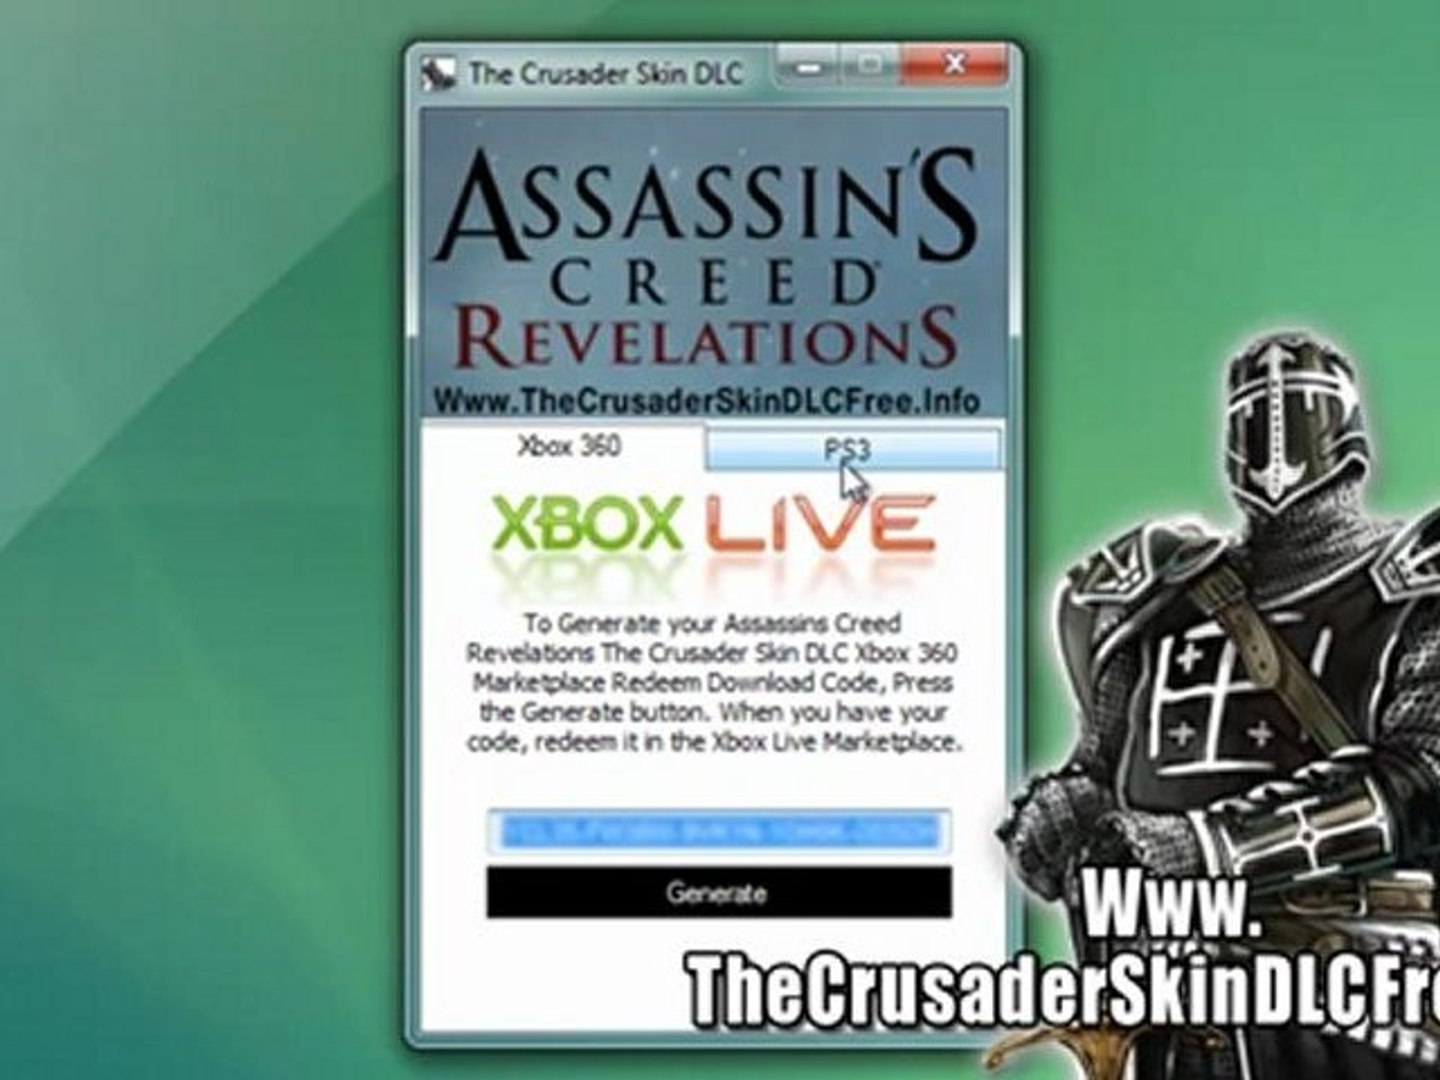 Assassins Creed Revelations The Crusader Skin DLC Codes - Free!! - video  Dailymotion